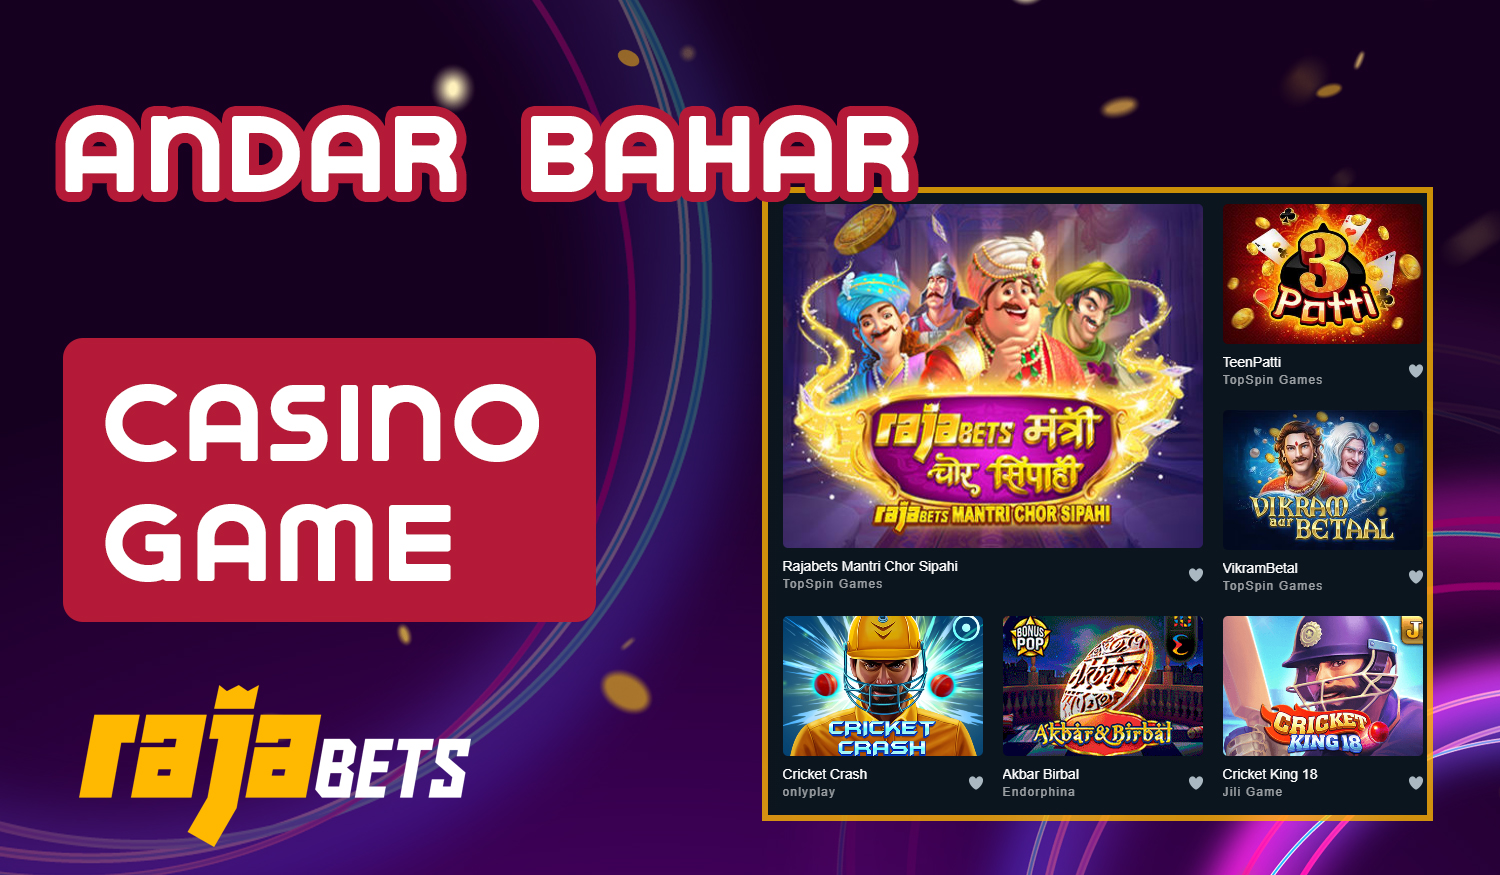 What games are available to online casino fans from India at Rajabets